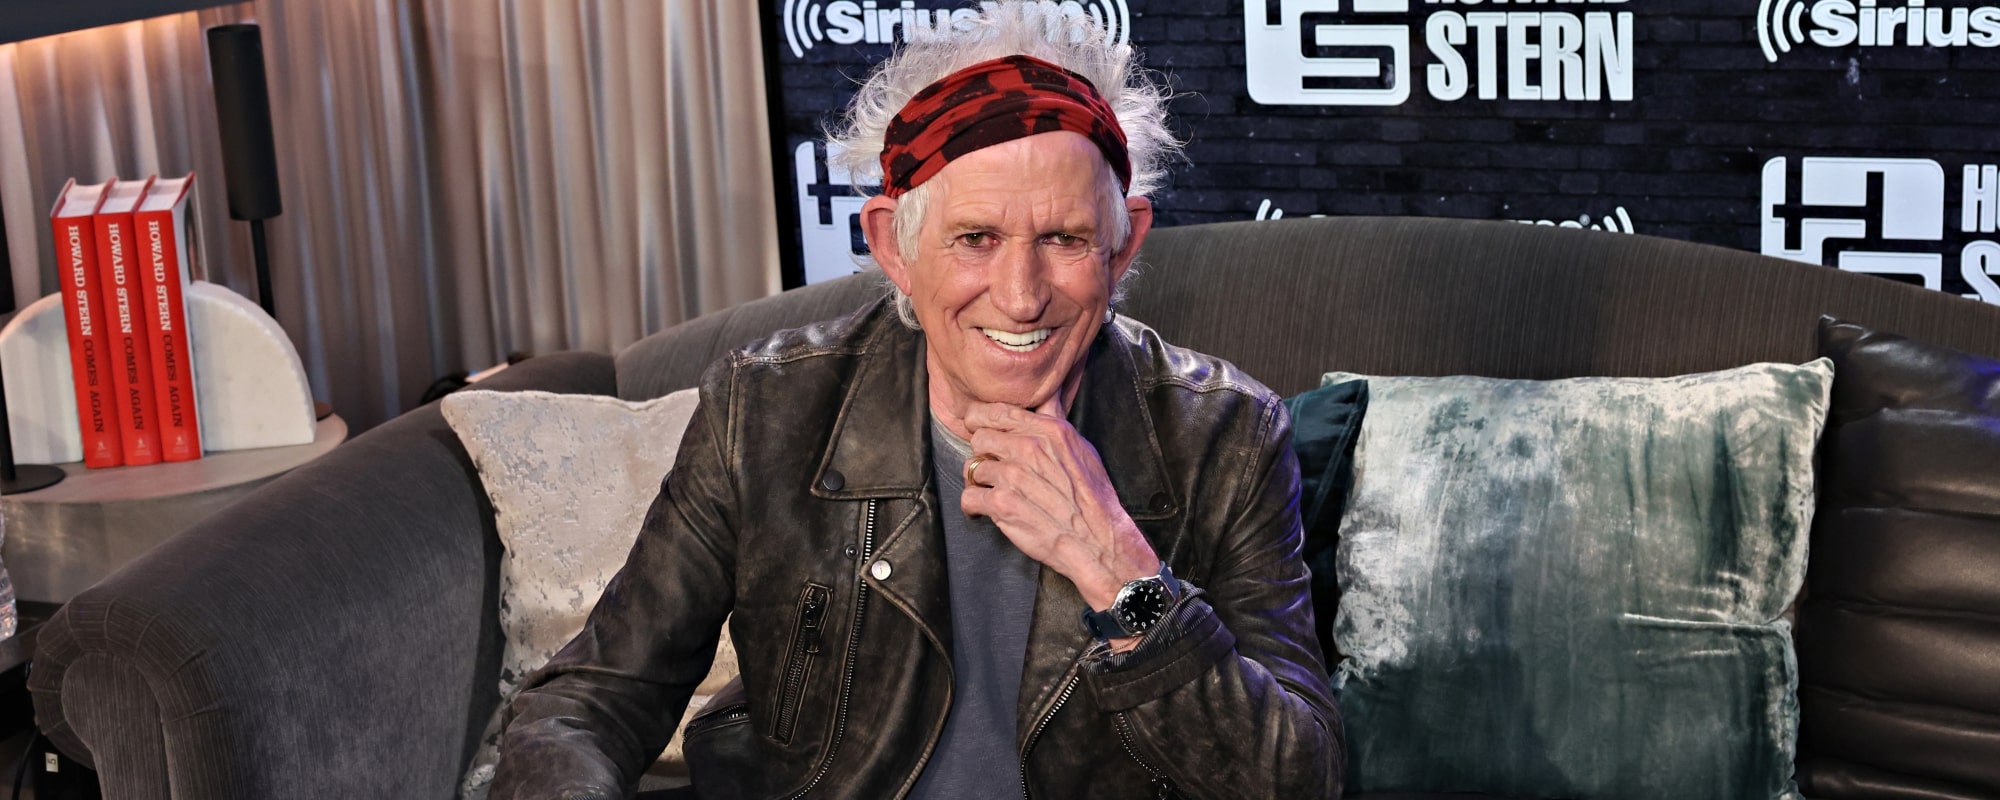 Keith Richards on Aging: “I Feel Perfectly Fine, [but] I’m Waiting for the Diapers”